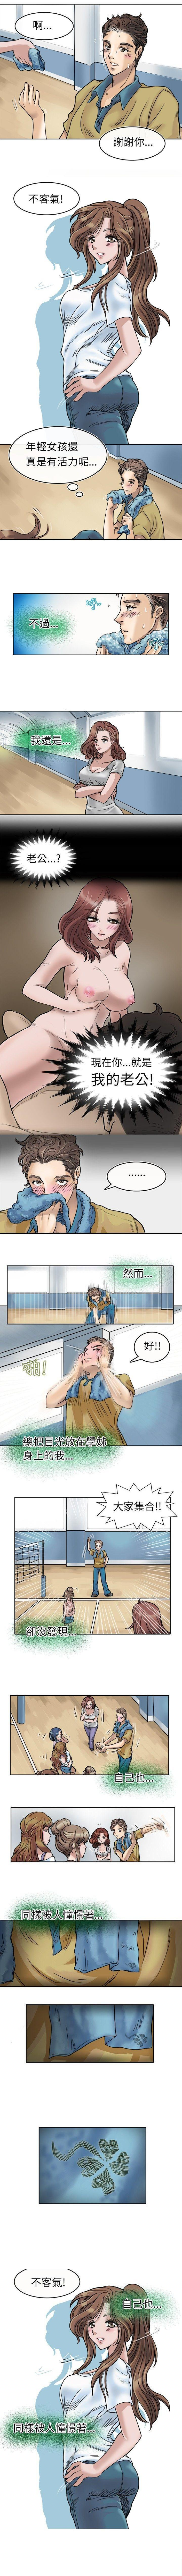 Pain 教練教教我 1-50 Chubby - Page 4